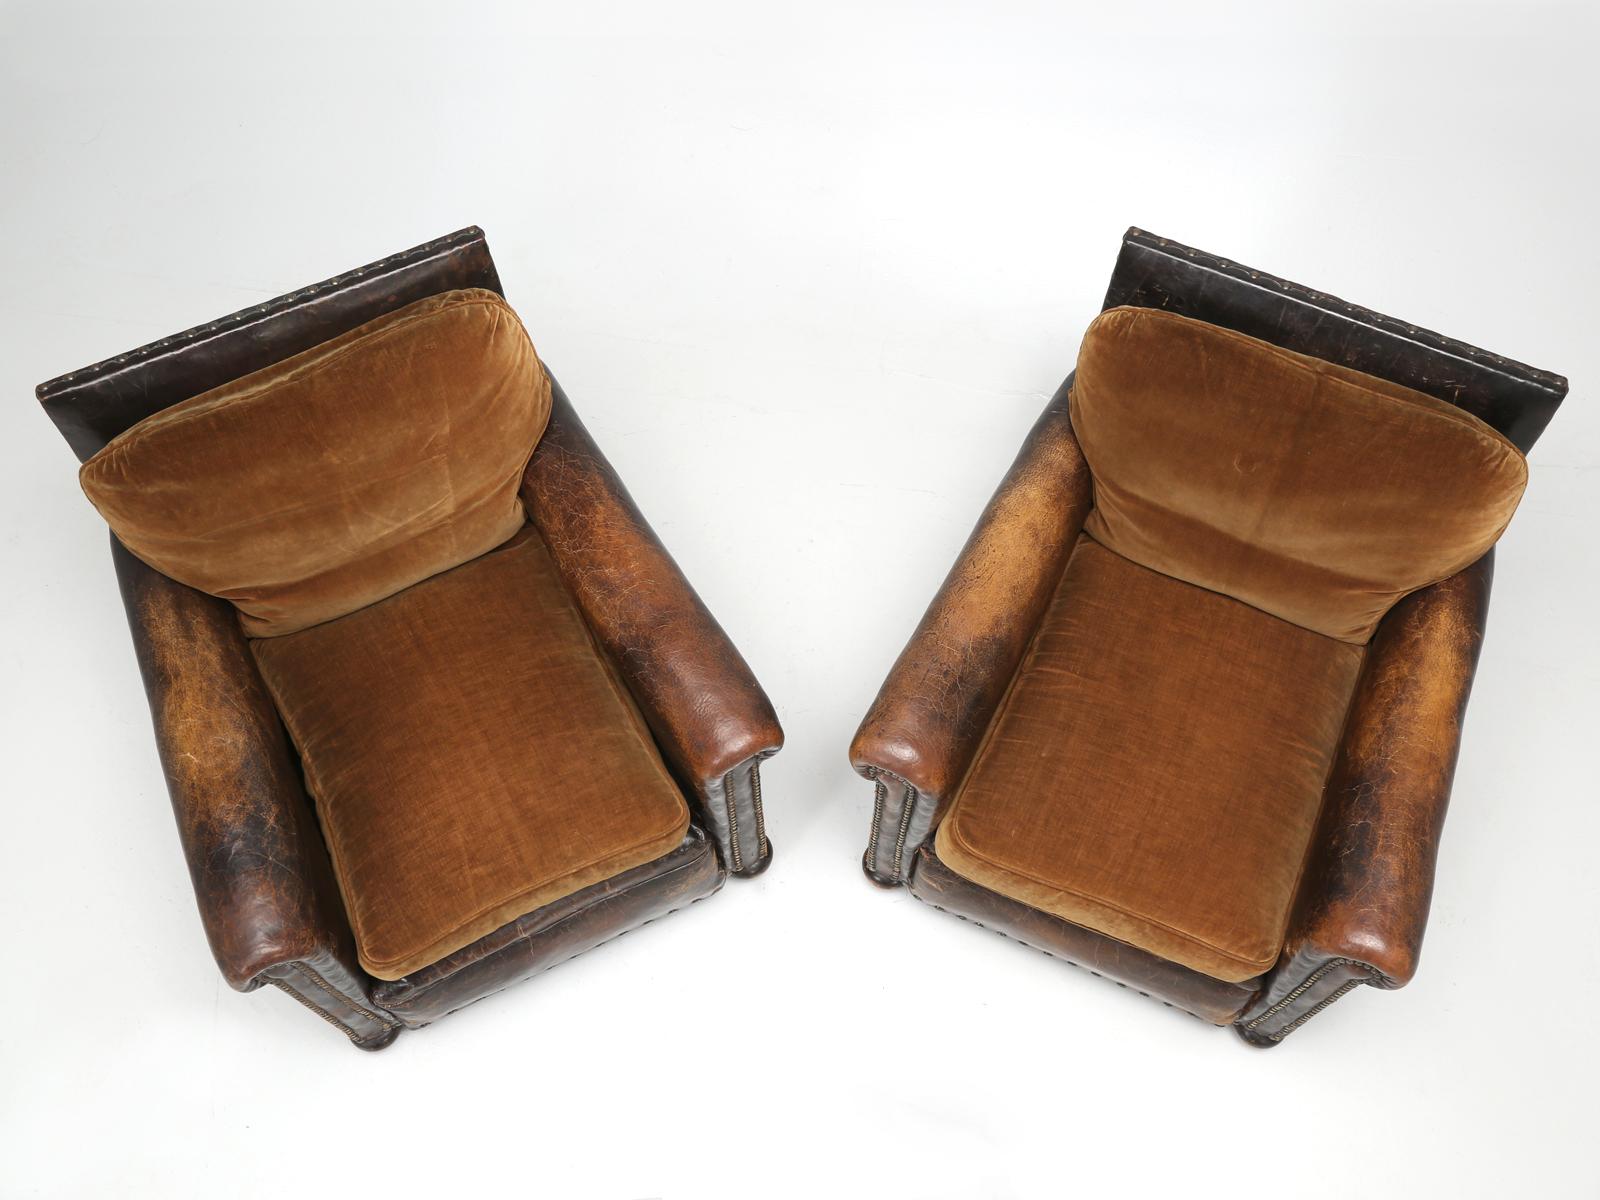 Hand-Crafted Antique Leather Club Chairs, Internally Restored Only, Cosmetically all Original